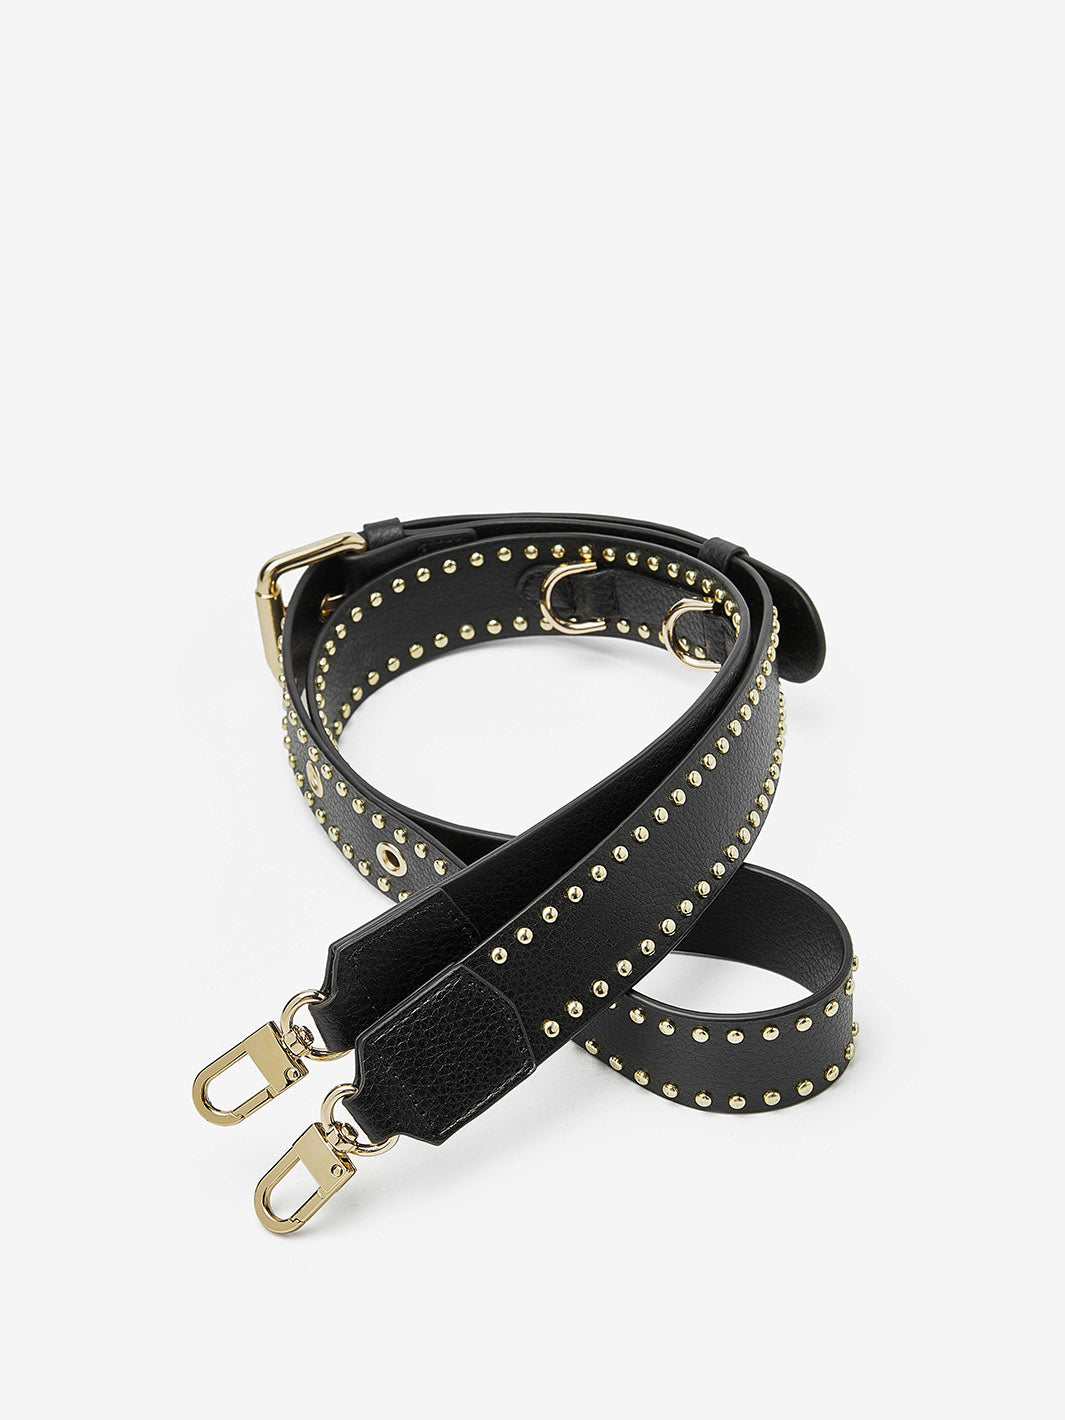 What's up with the font of this pochette Métis? Looks crooked🥴 :  r/Louisvuitton